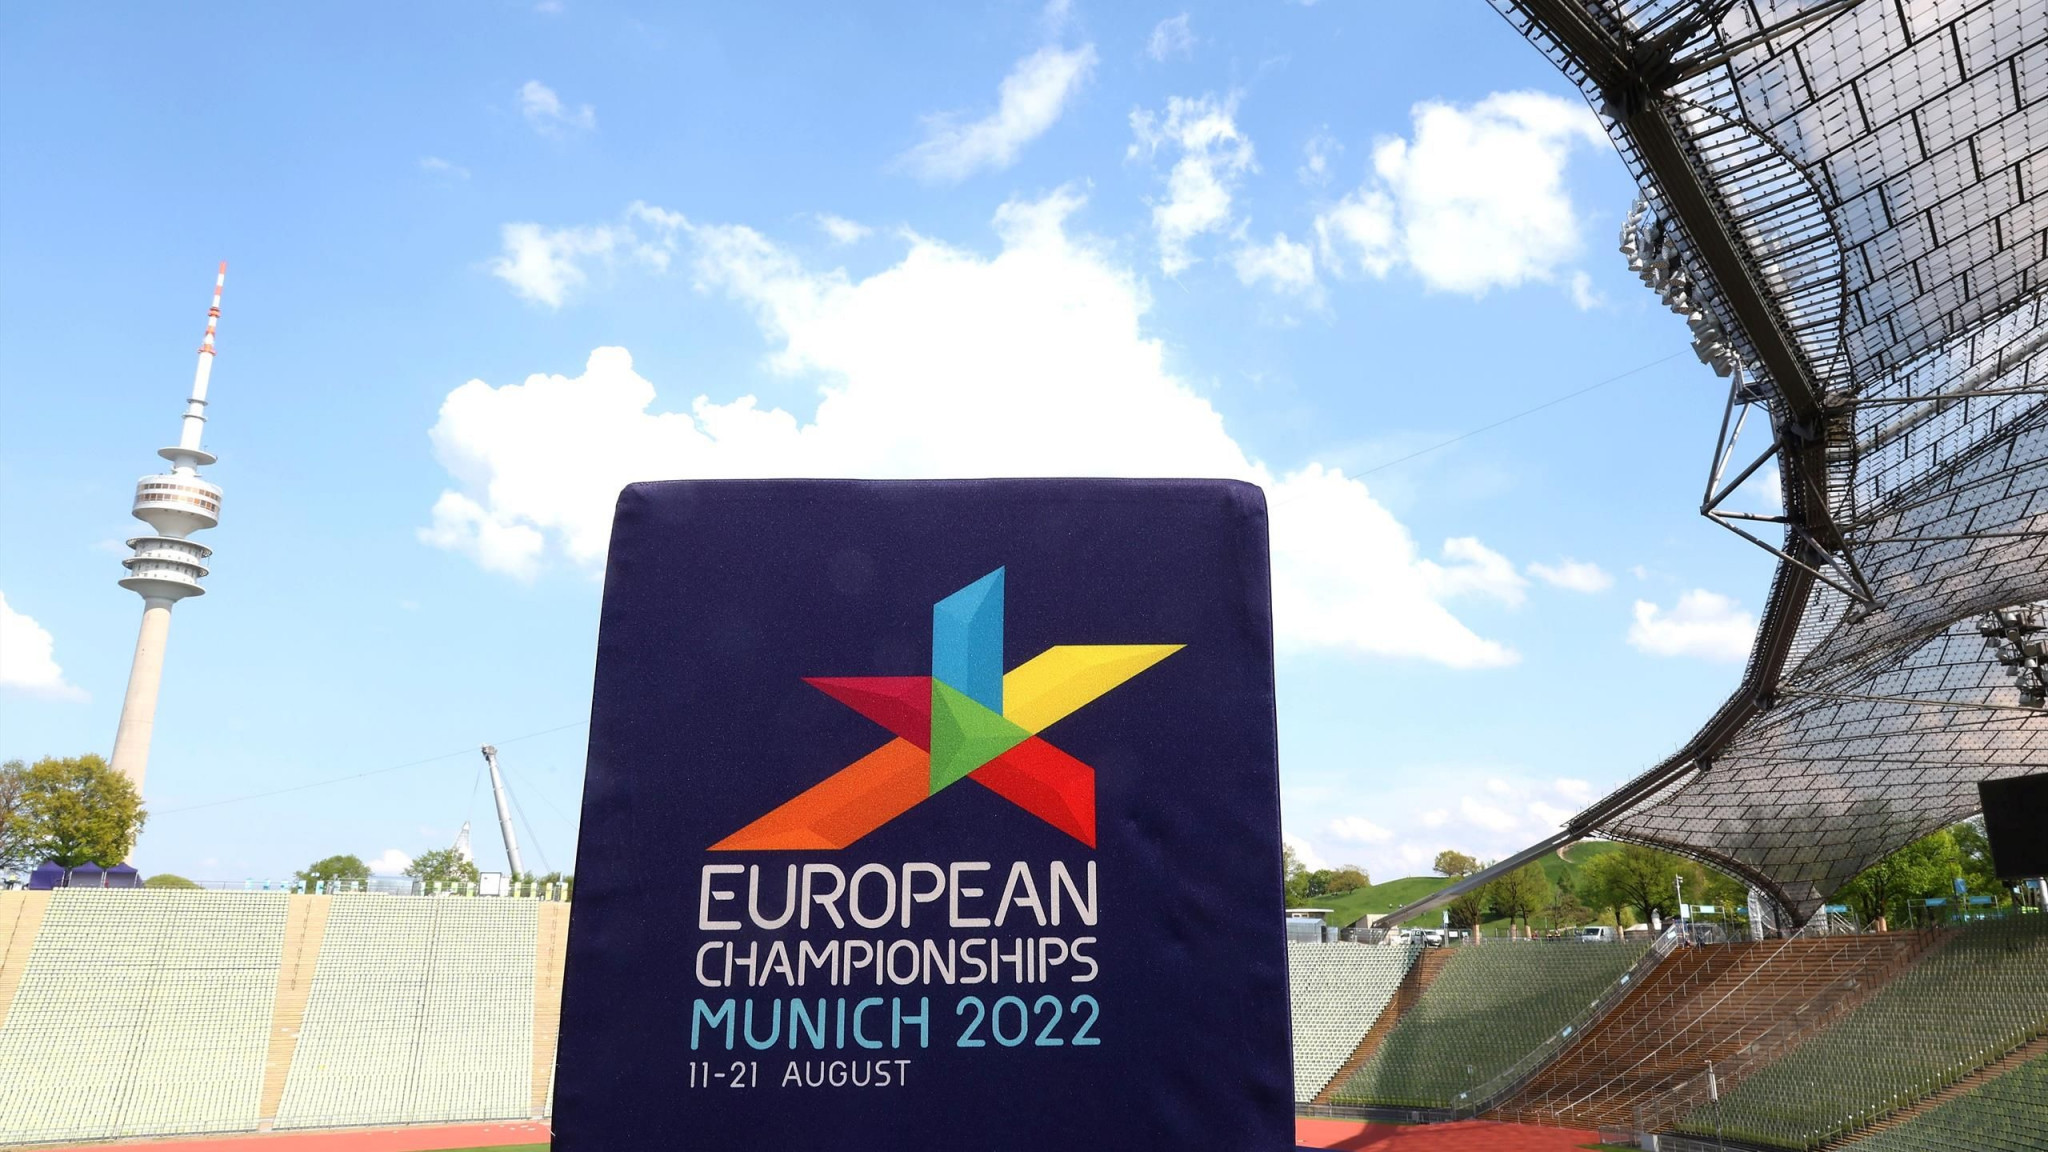 German authorities have thrown their full support behind the 2022 European Championships, the highlight of the 50th anniversary of the 1972 Olympic Games ©Munich 2022